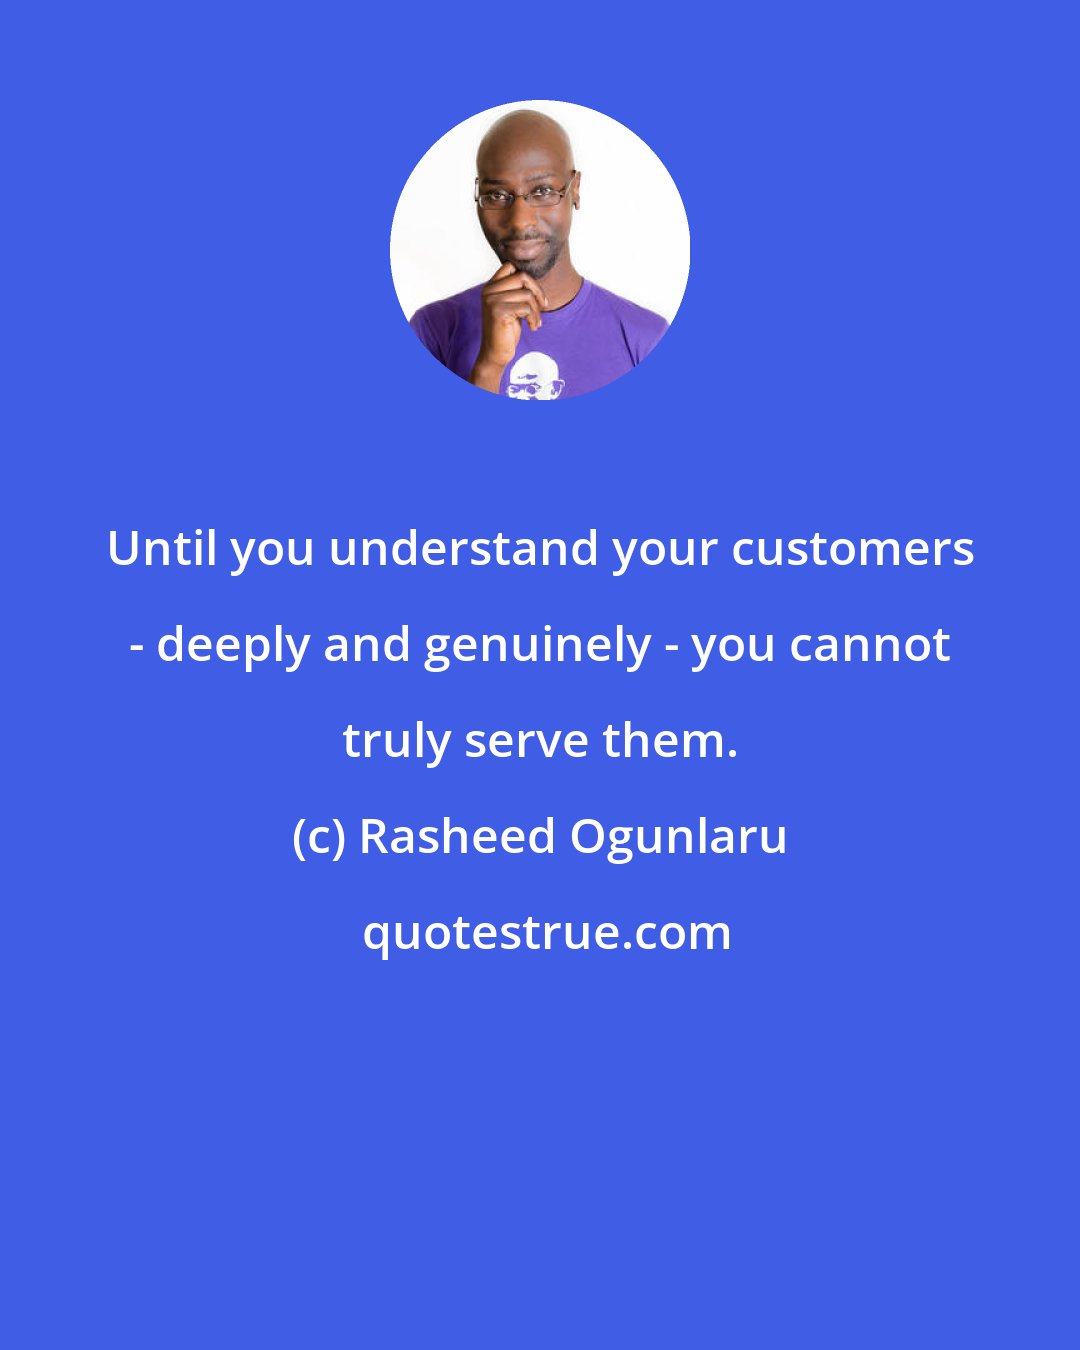 Rasheed Ogunlaru: Until you understand your customers - deeply and genuinely - you cannot truly serve them.